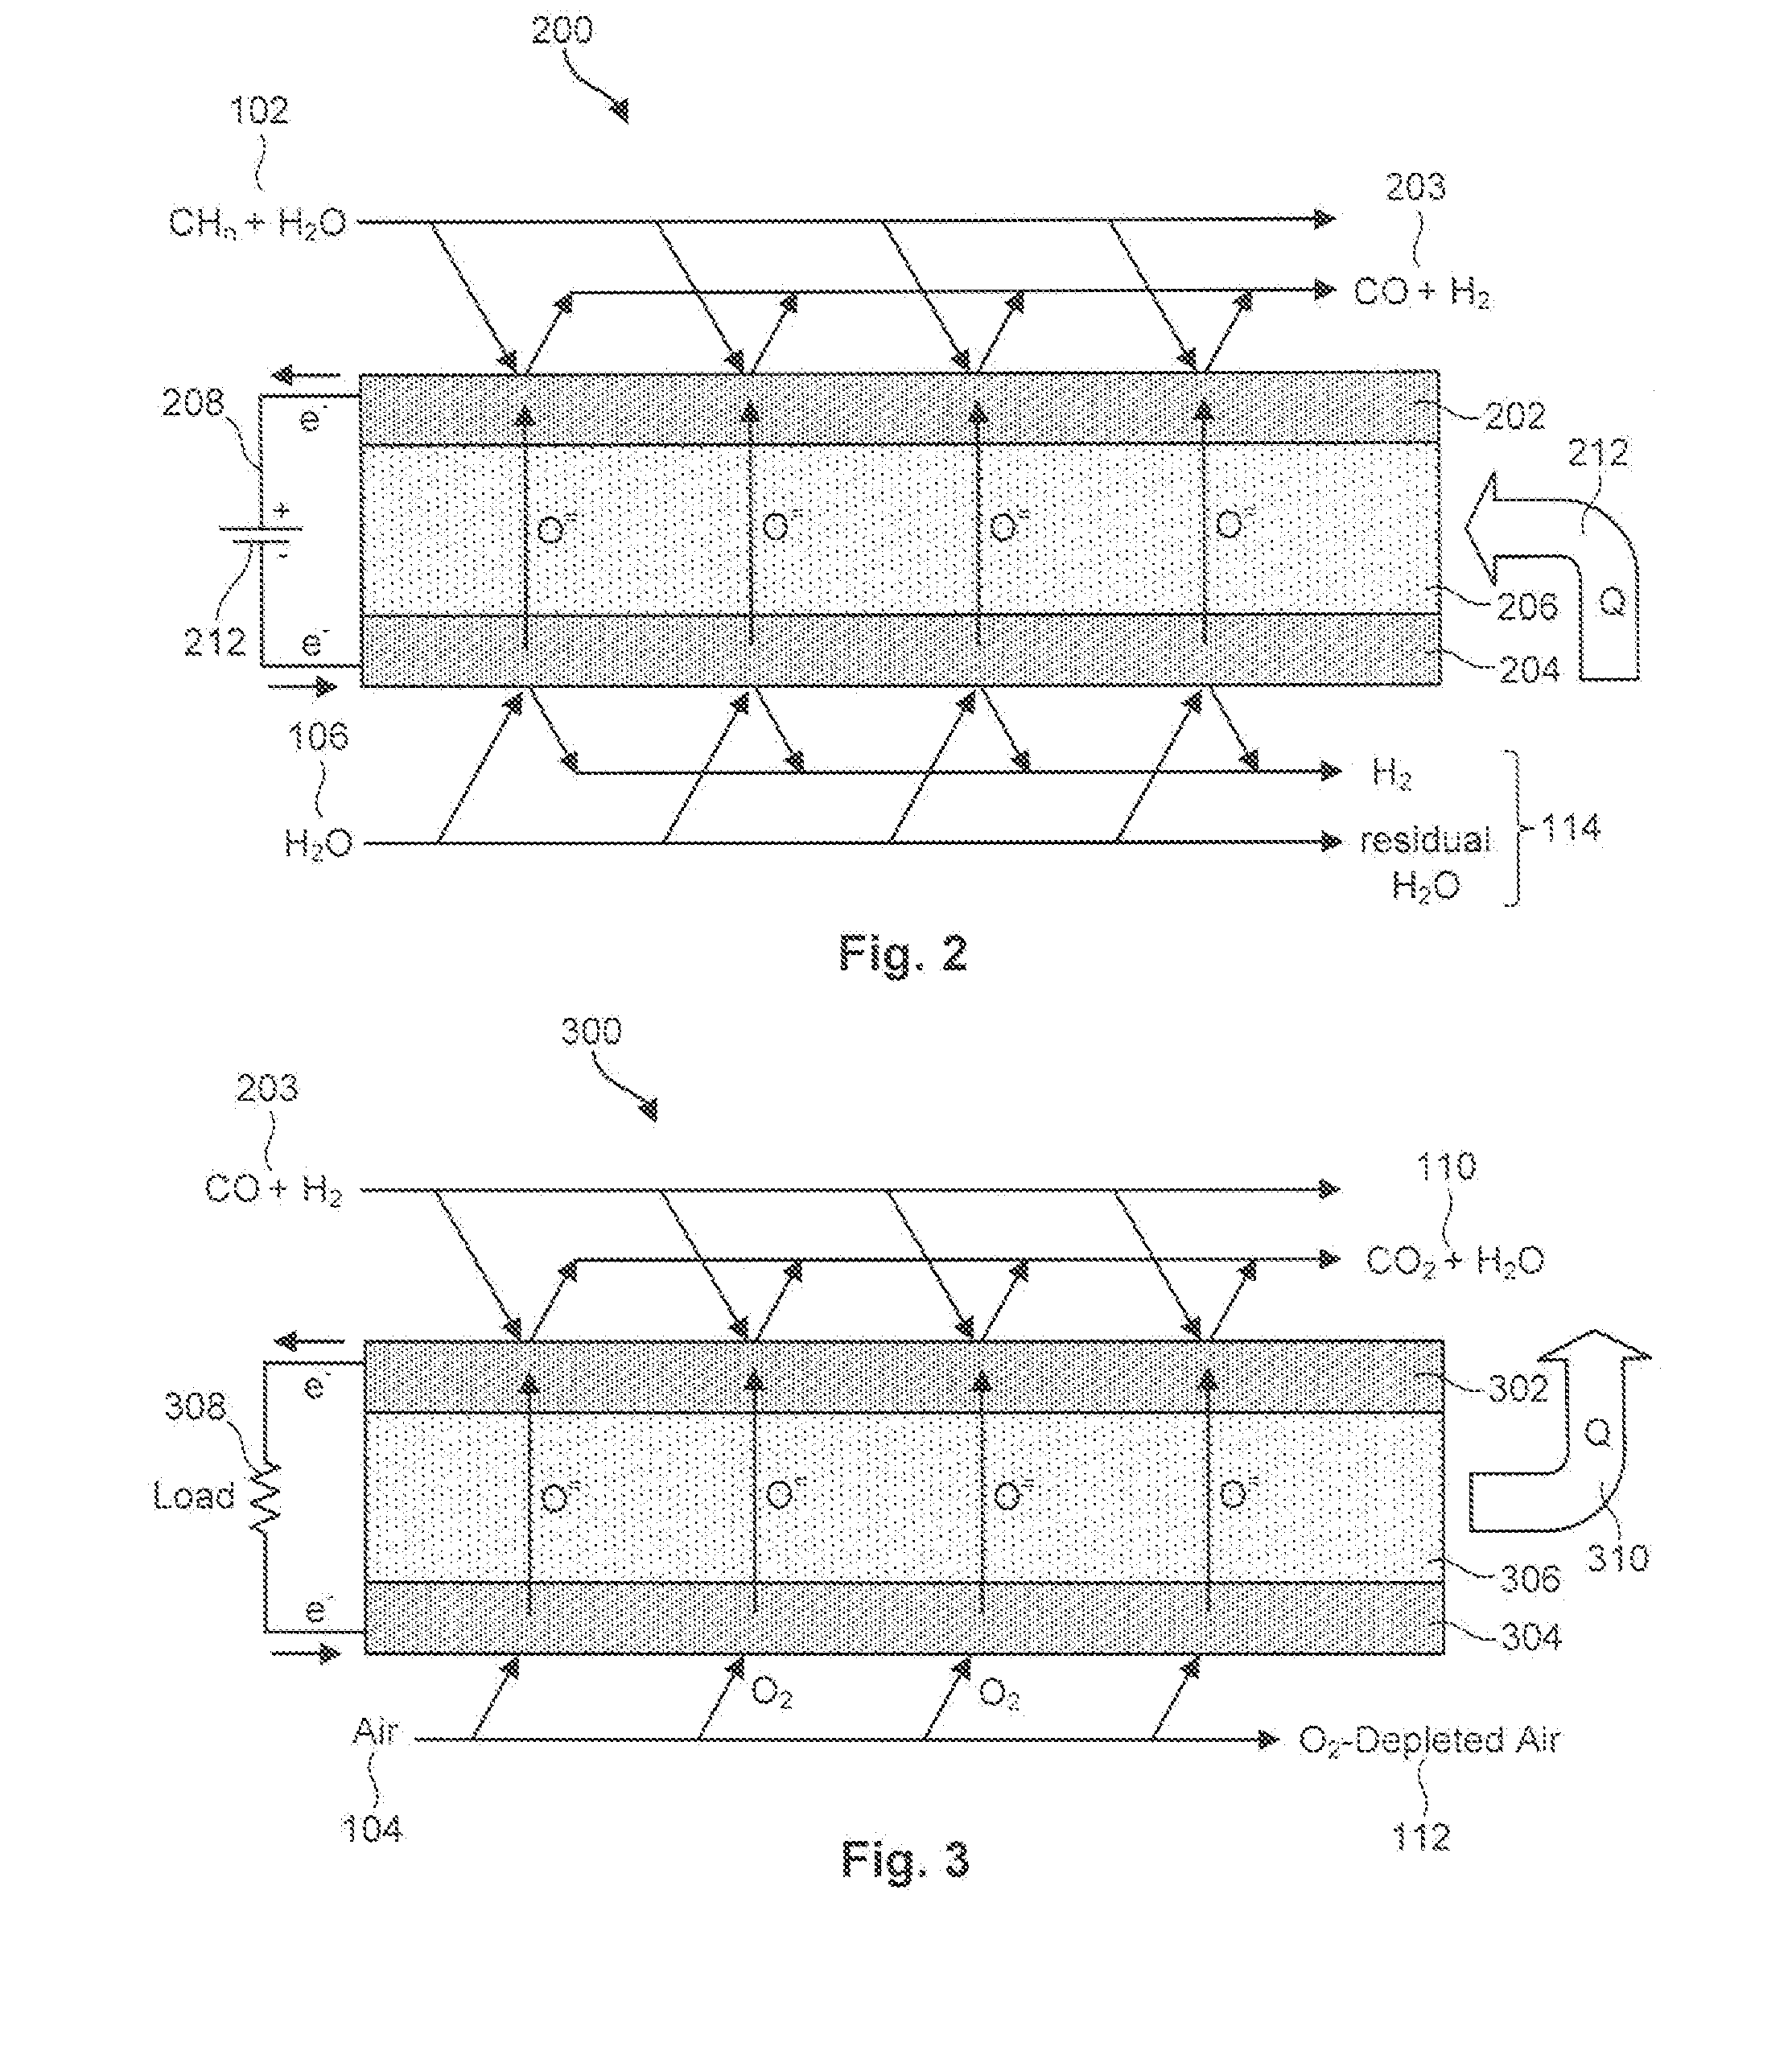 High Purity Hydrogen and Electric Power Co-Generation Apparatus and Method